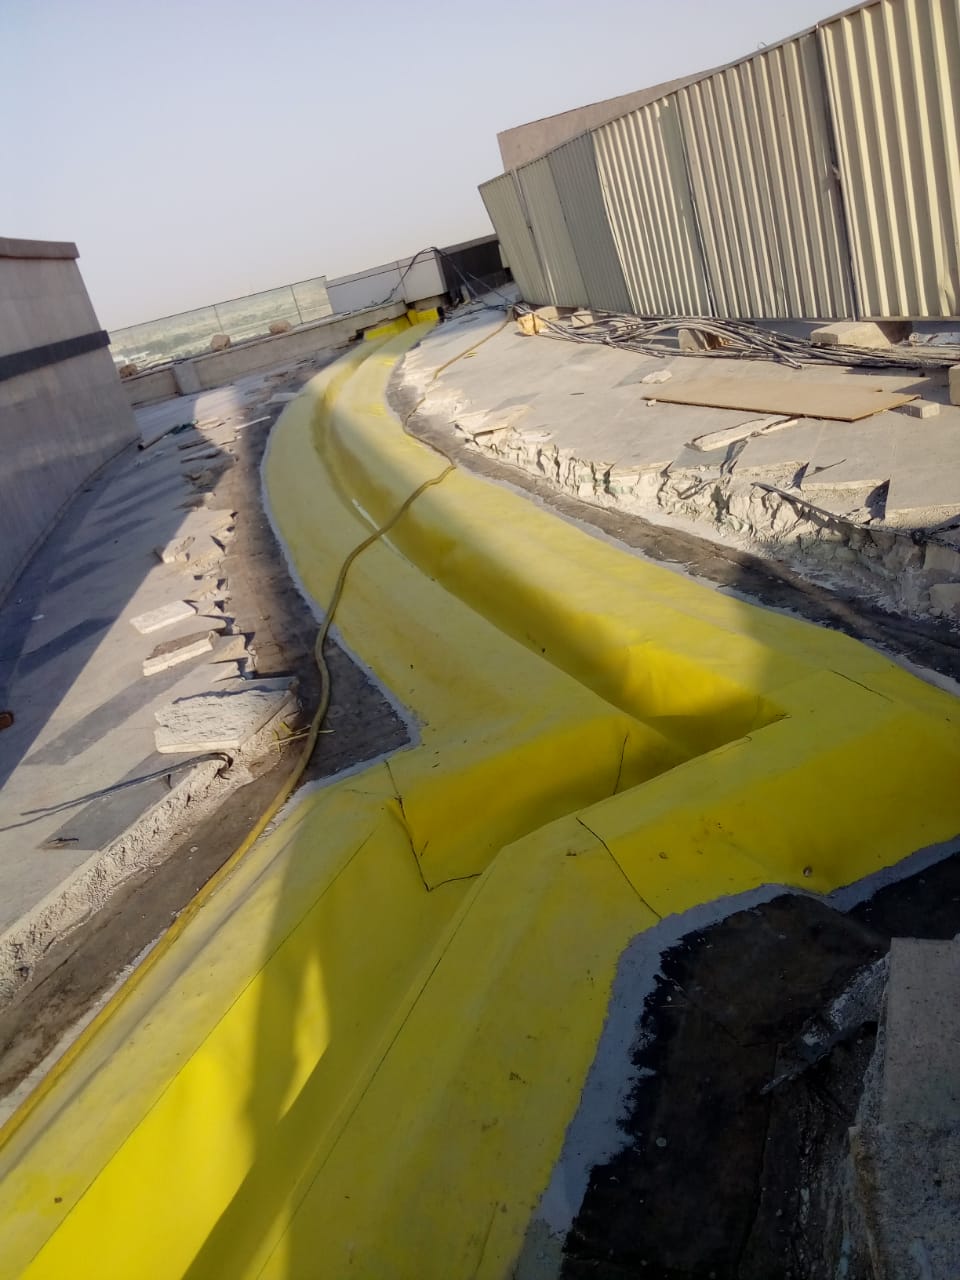 Expansion Joint Work For Sky Bubble Terrace At Dubai gallery